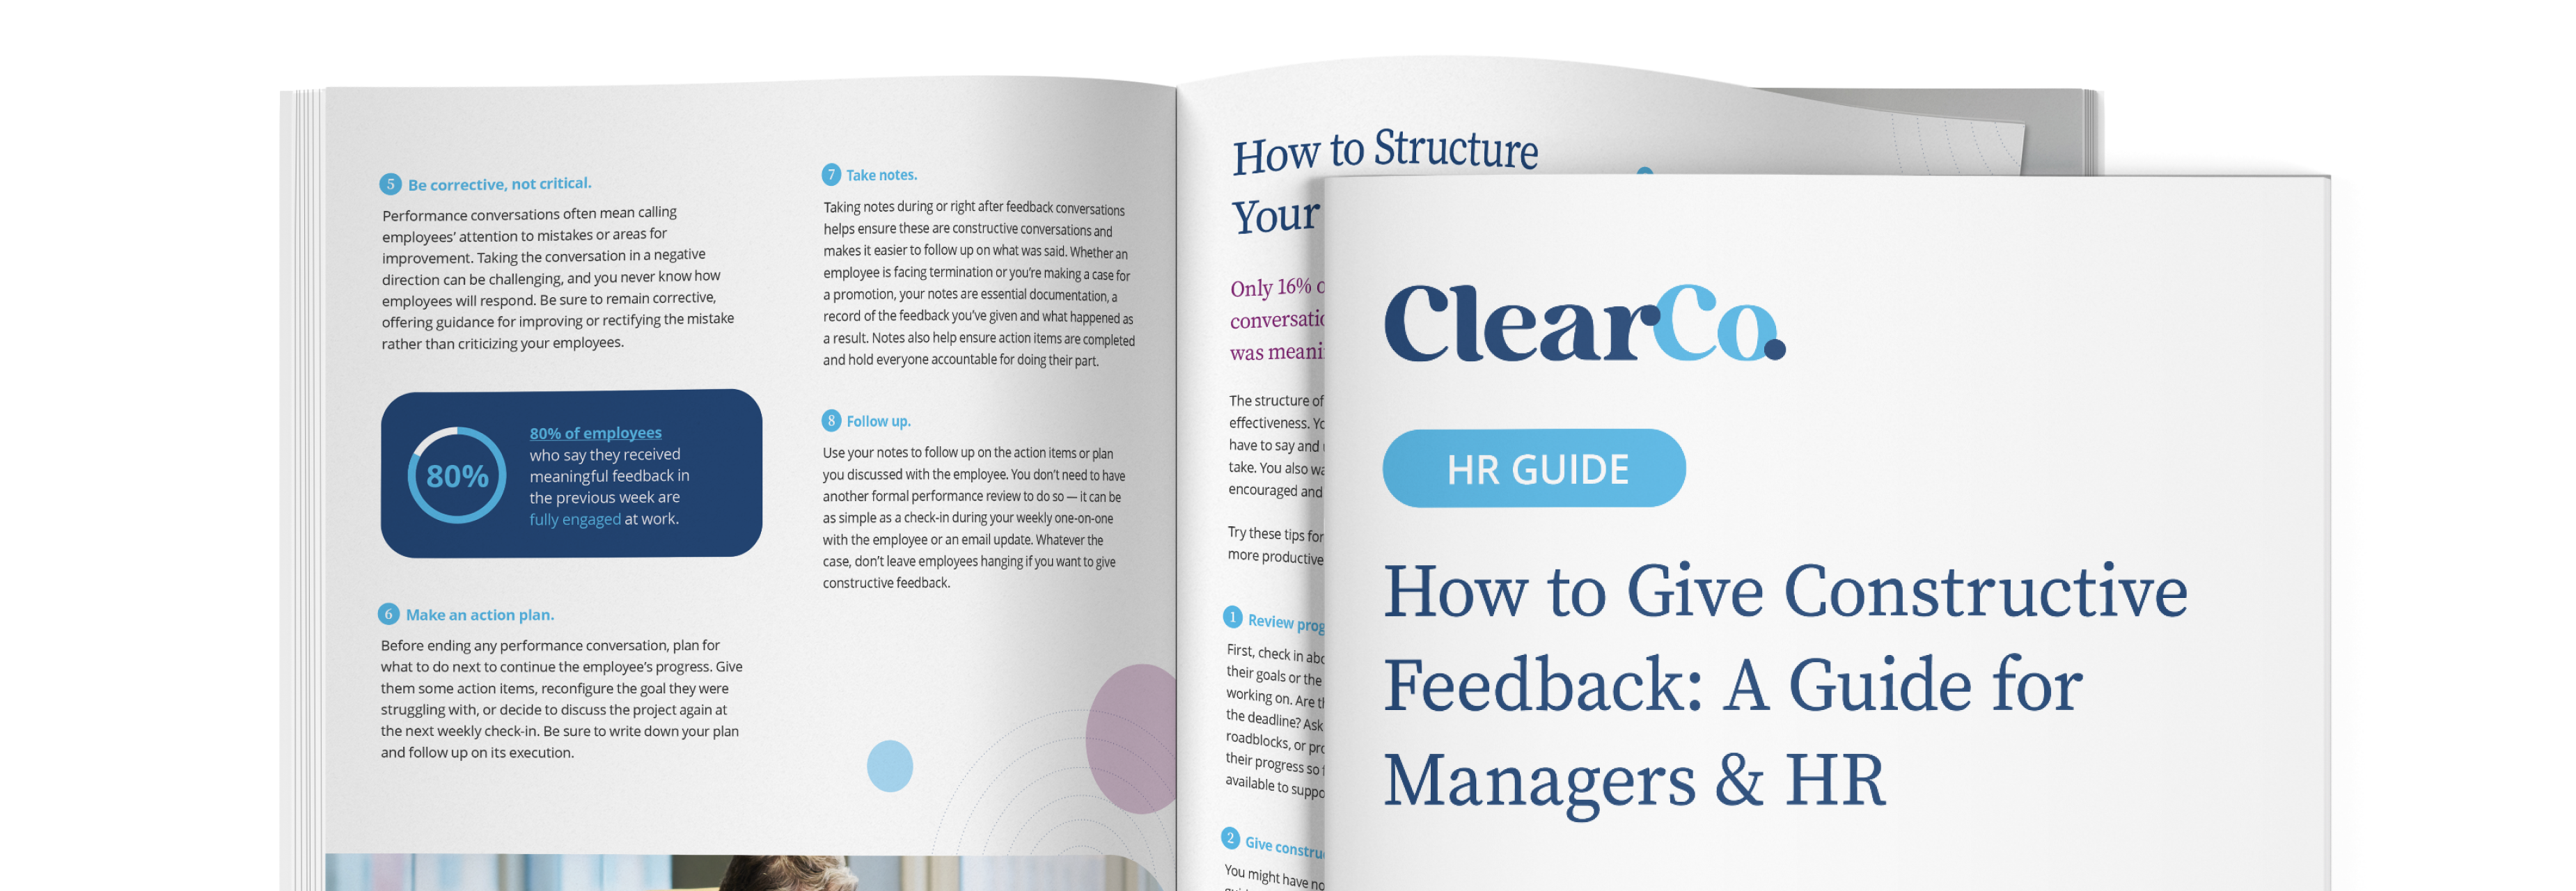 How-to-Give-Constructive-Feedback- A-Guide-for-Managers-HR Mockup